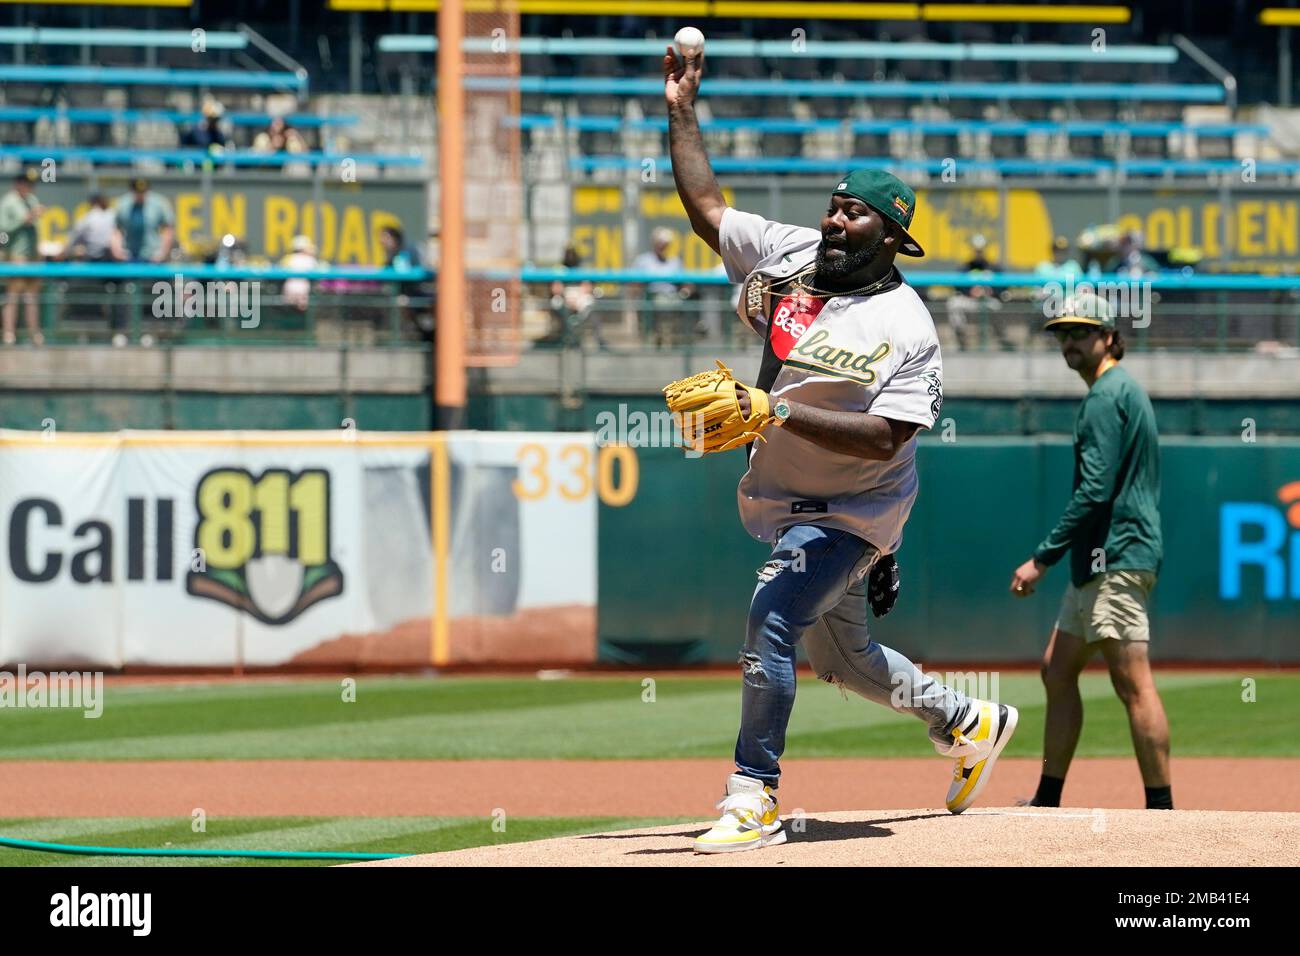 Oakland rapper Mistah F.A.B. throws the first pitch before a